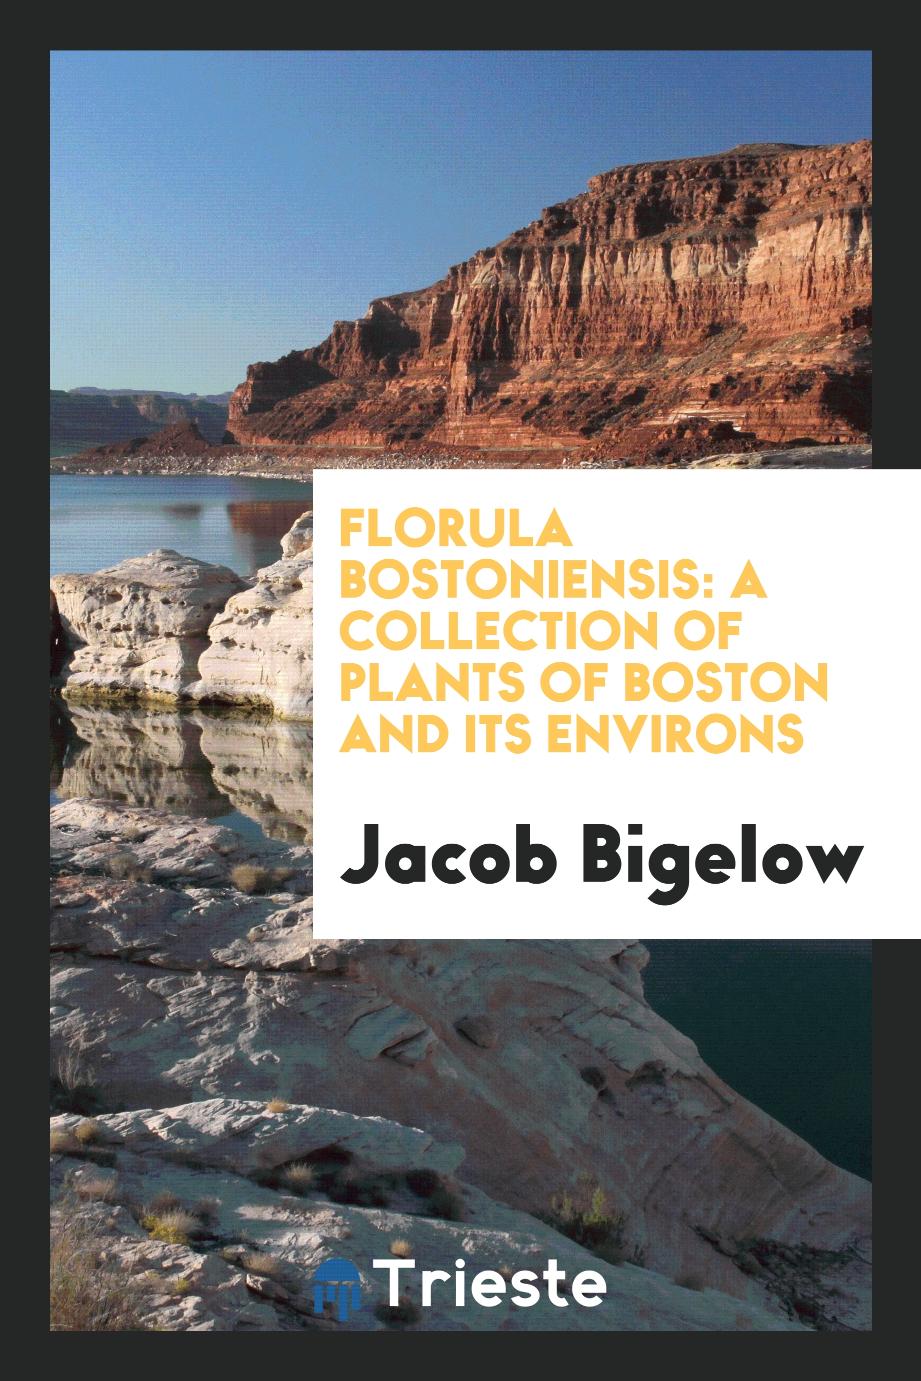 Florula Bostoniensis: A Collection of Plants of Boston and Its Environs